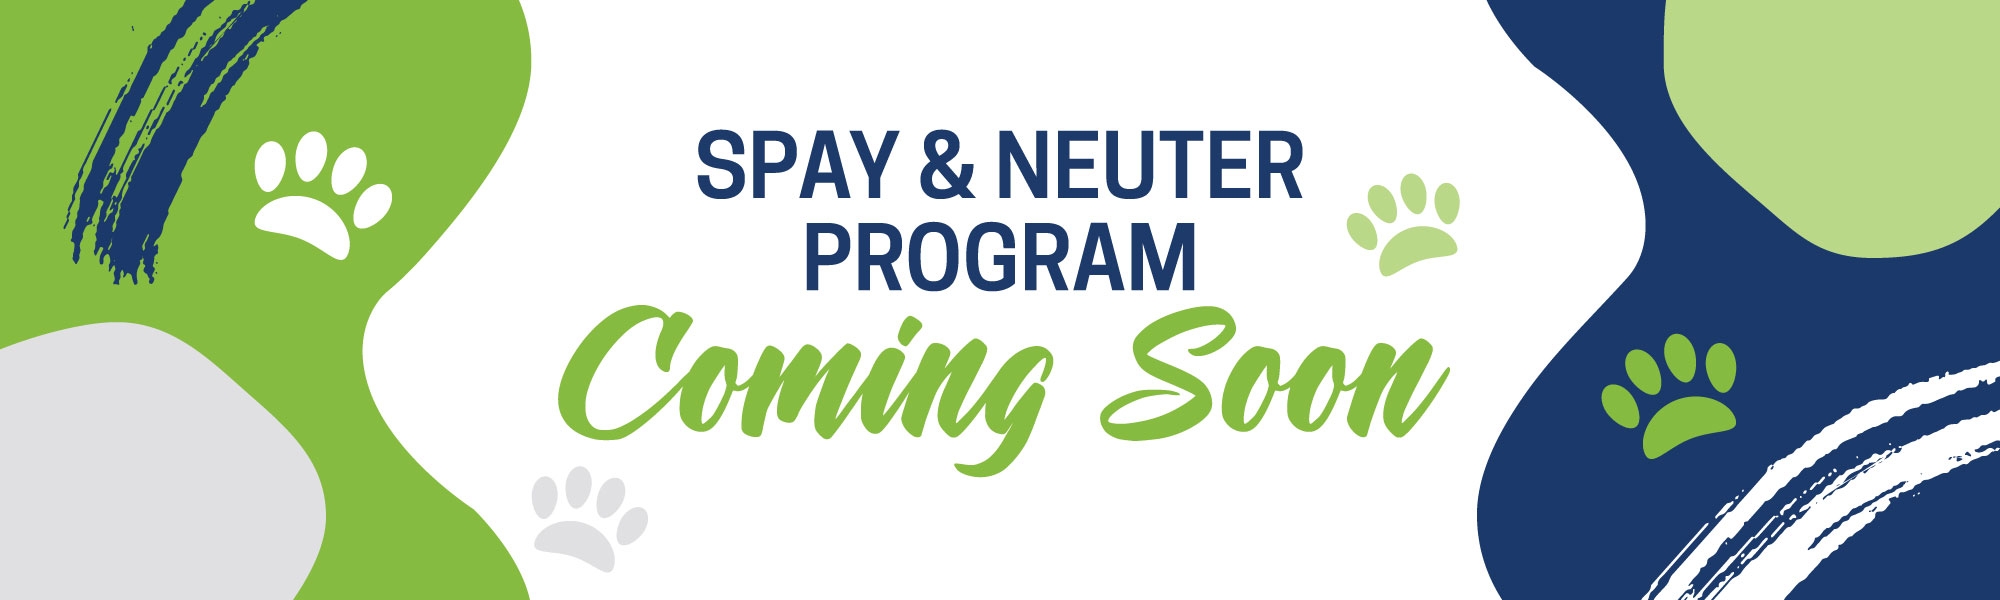 Spay and Neuter Program coming soon